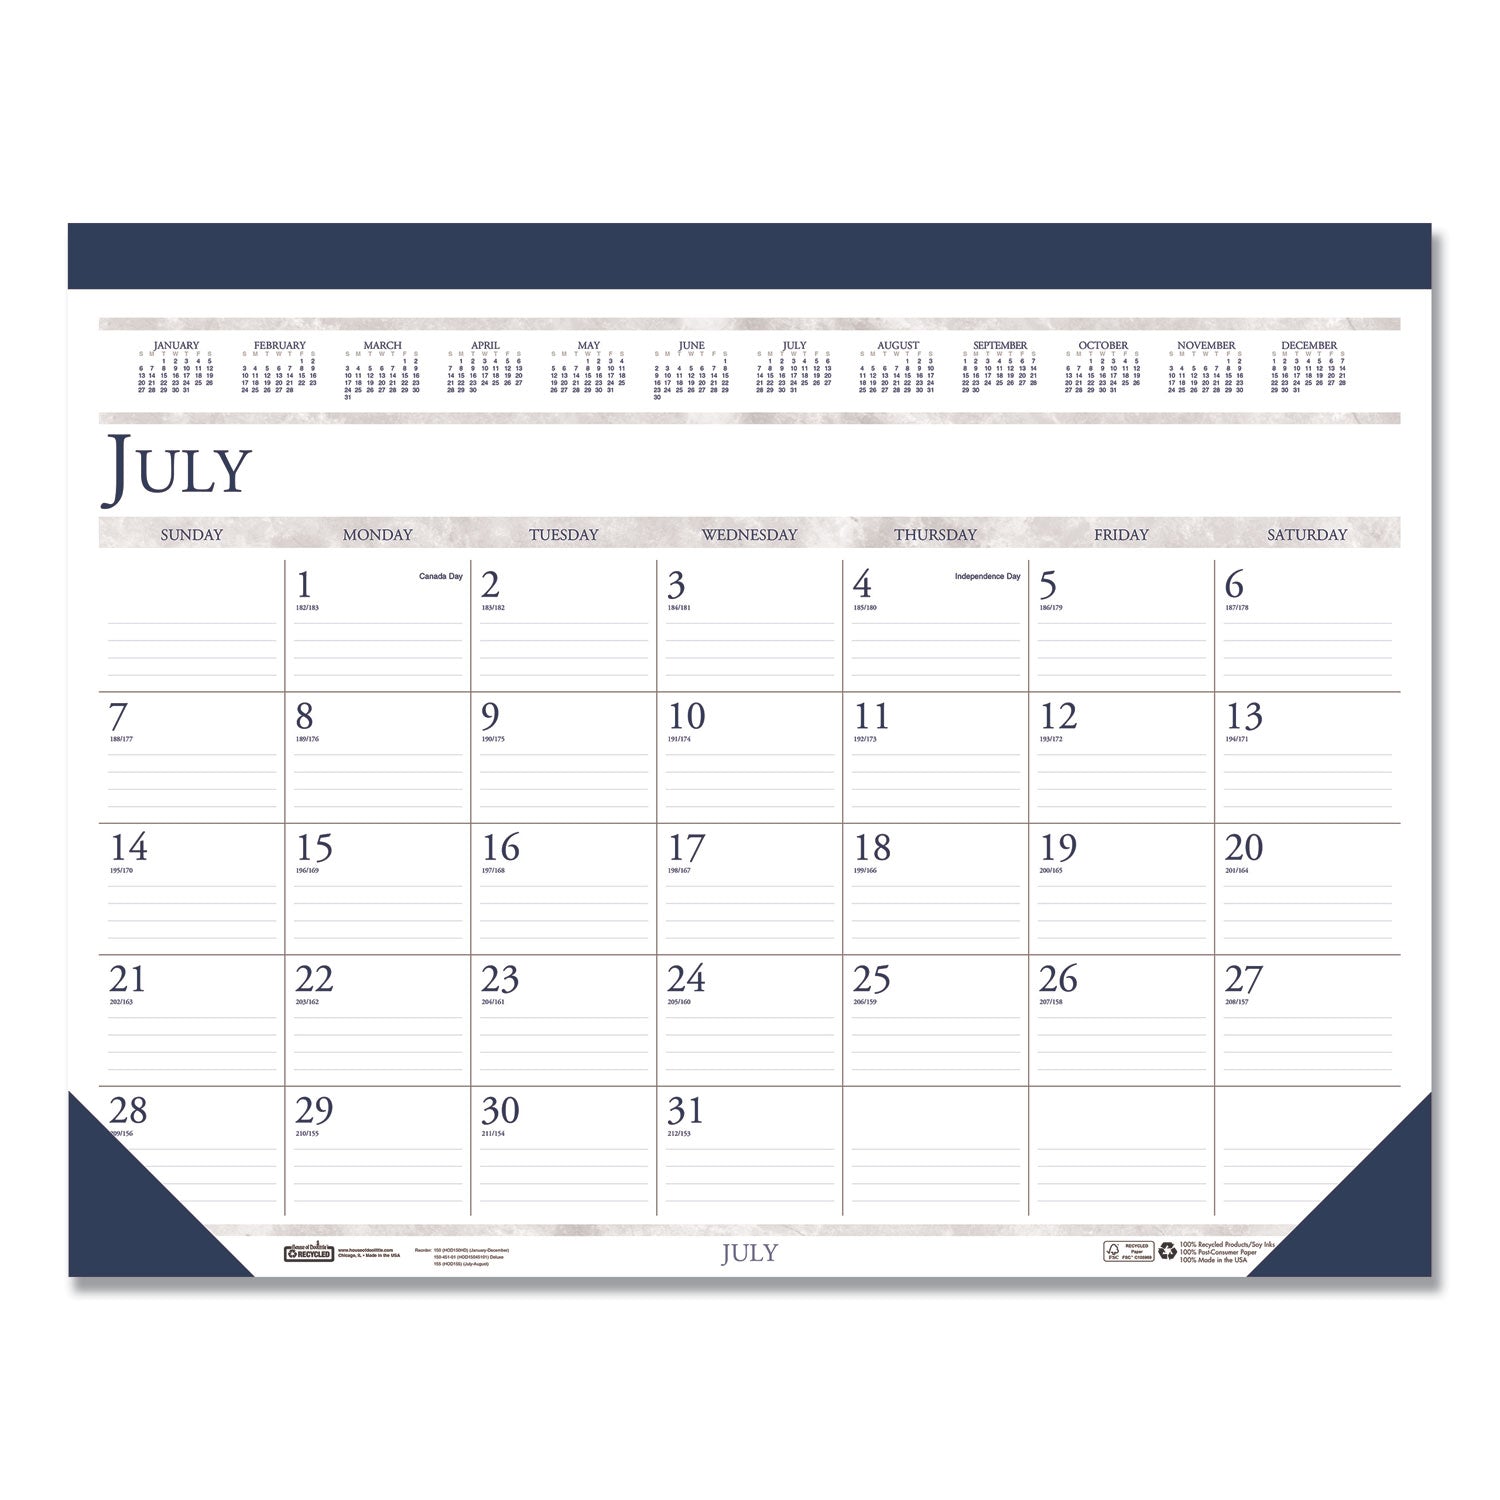 recycled-academic-desk-pad-calendar-185-x-13-white-blue-sheets-blue-binding-corners-14-month-july-to-aug-2023-to-2024_hod1556 - 2